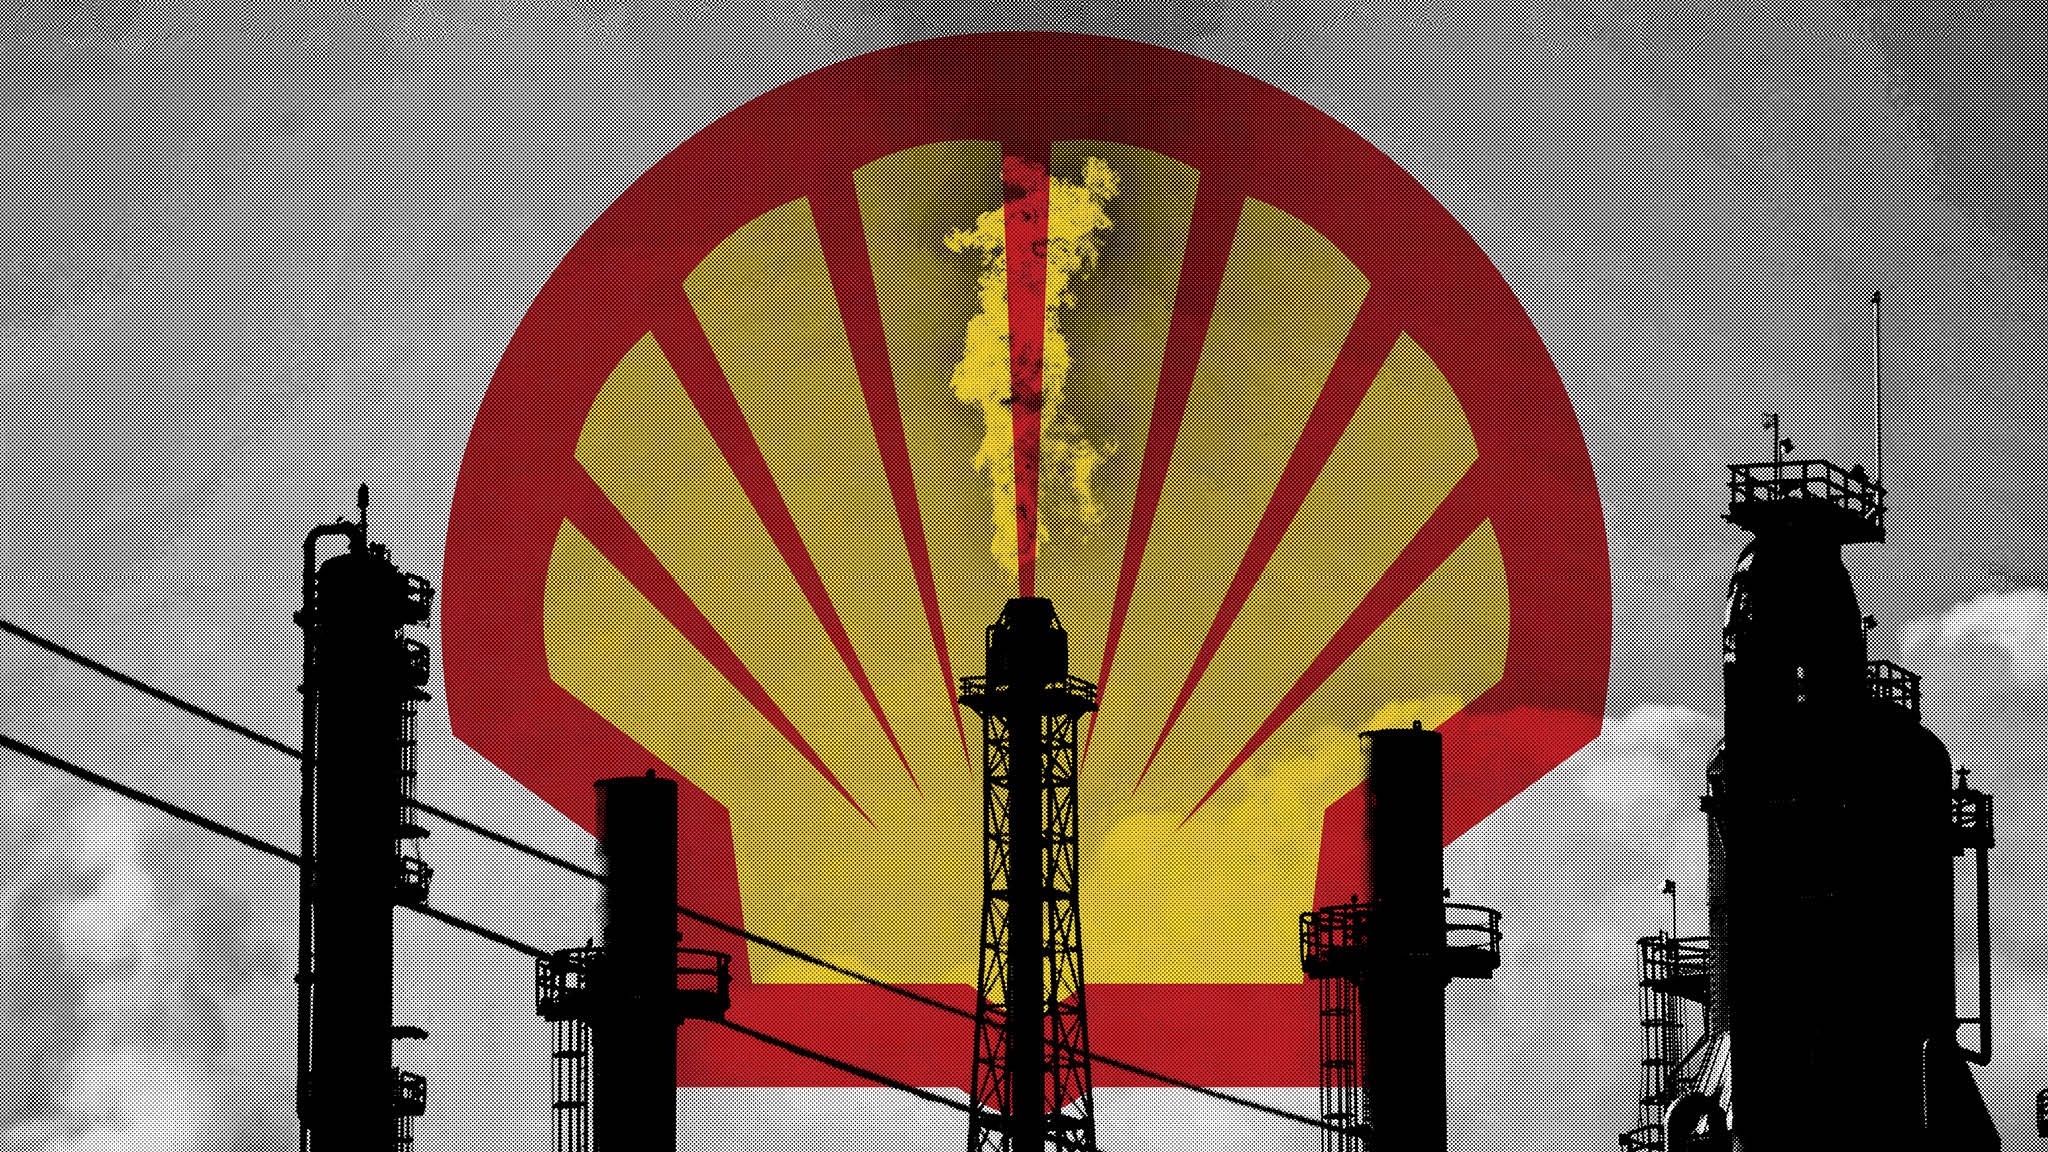 Shell case puts spotlight on energy groups' role in climate change | Financial Times